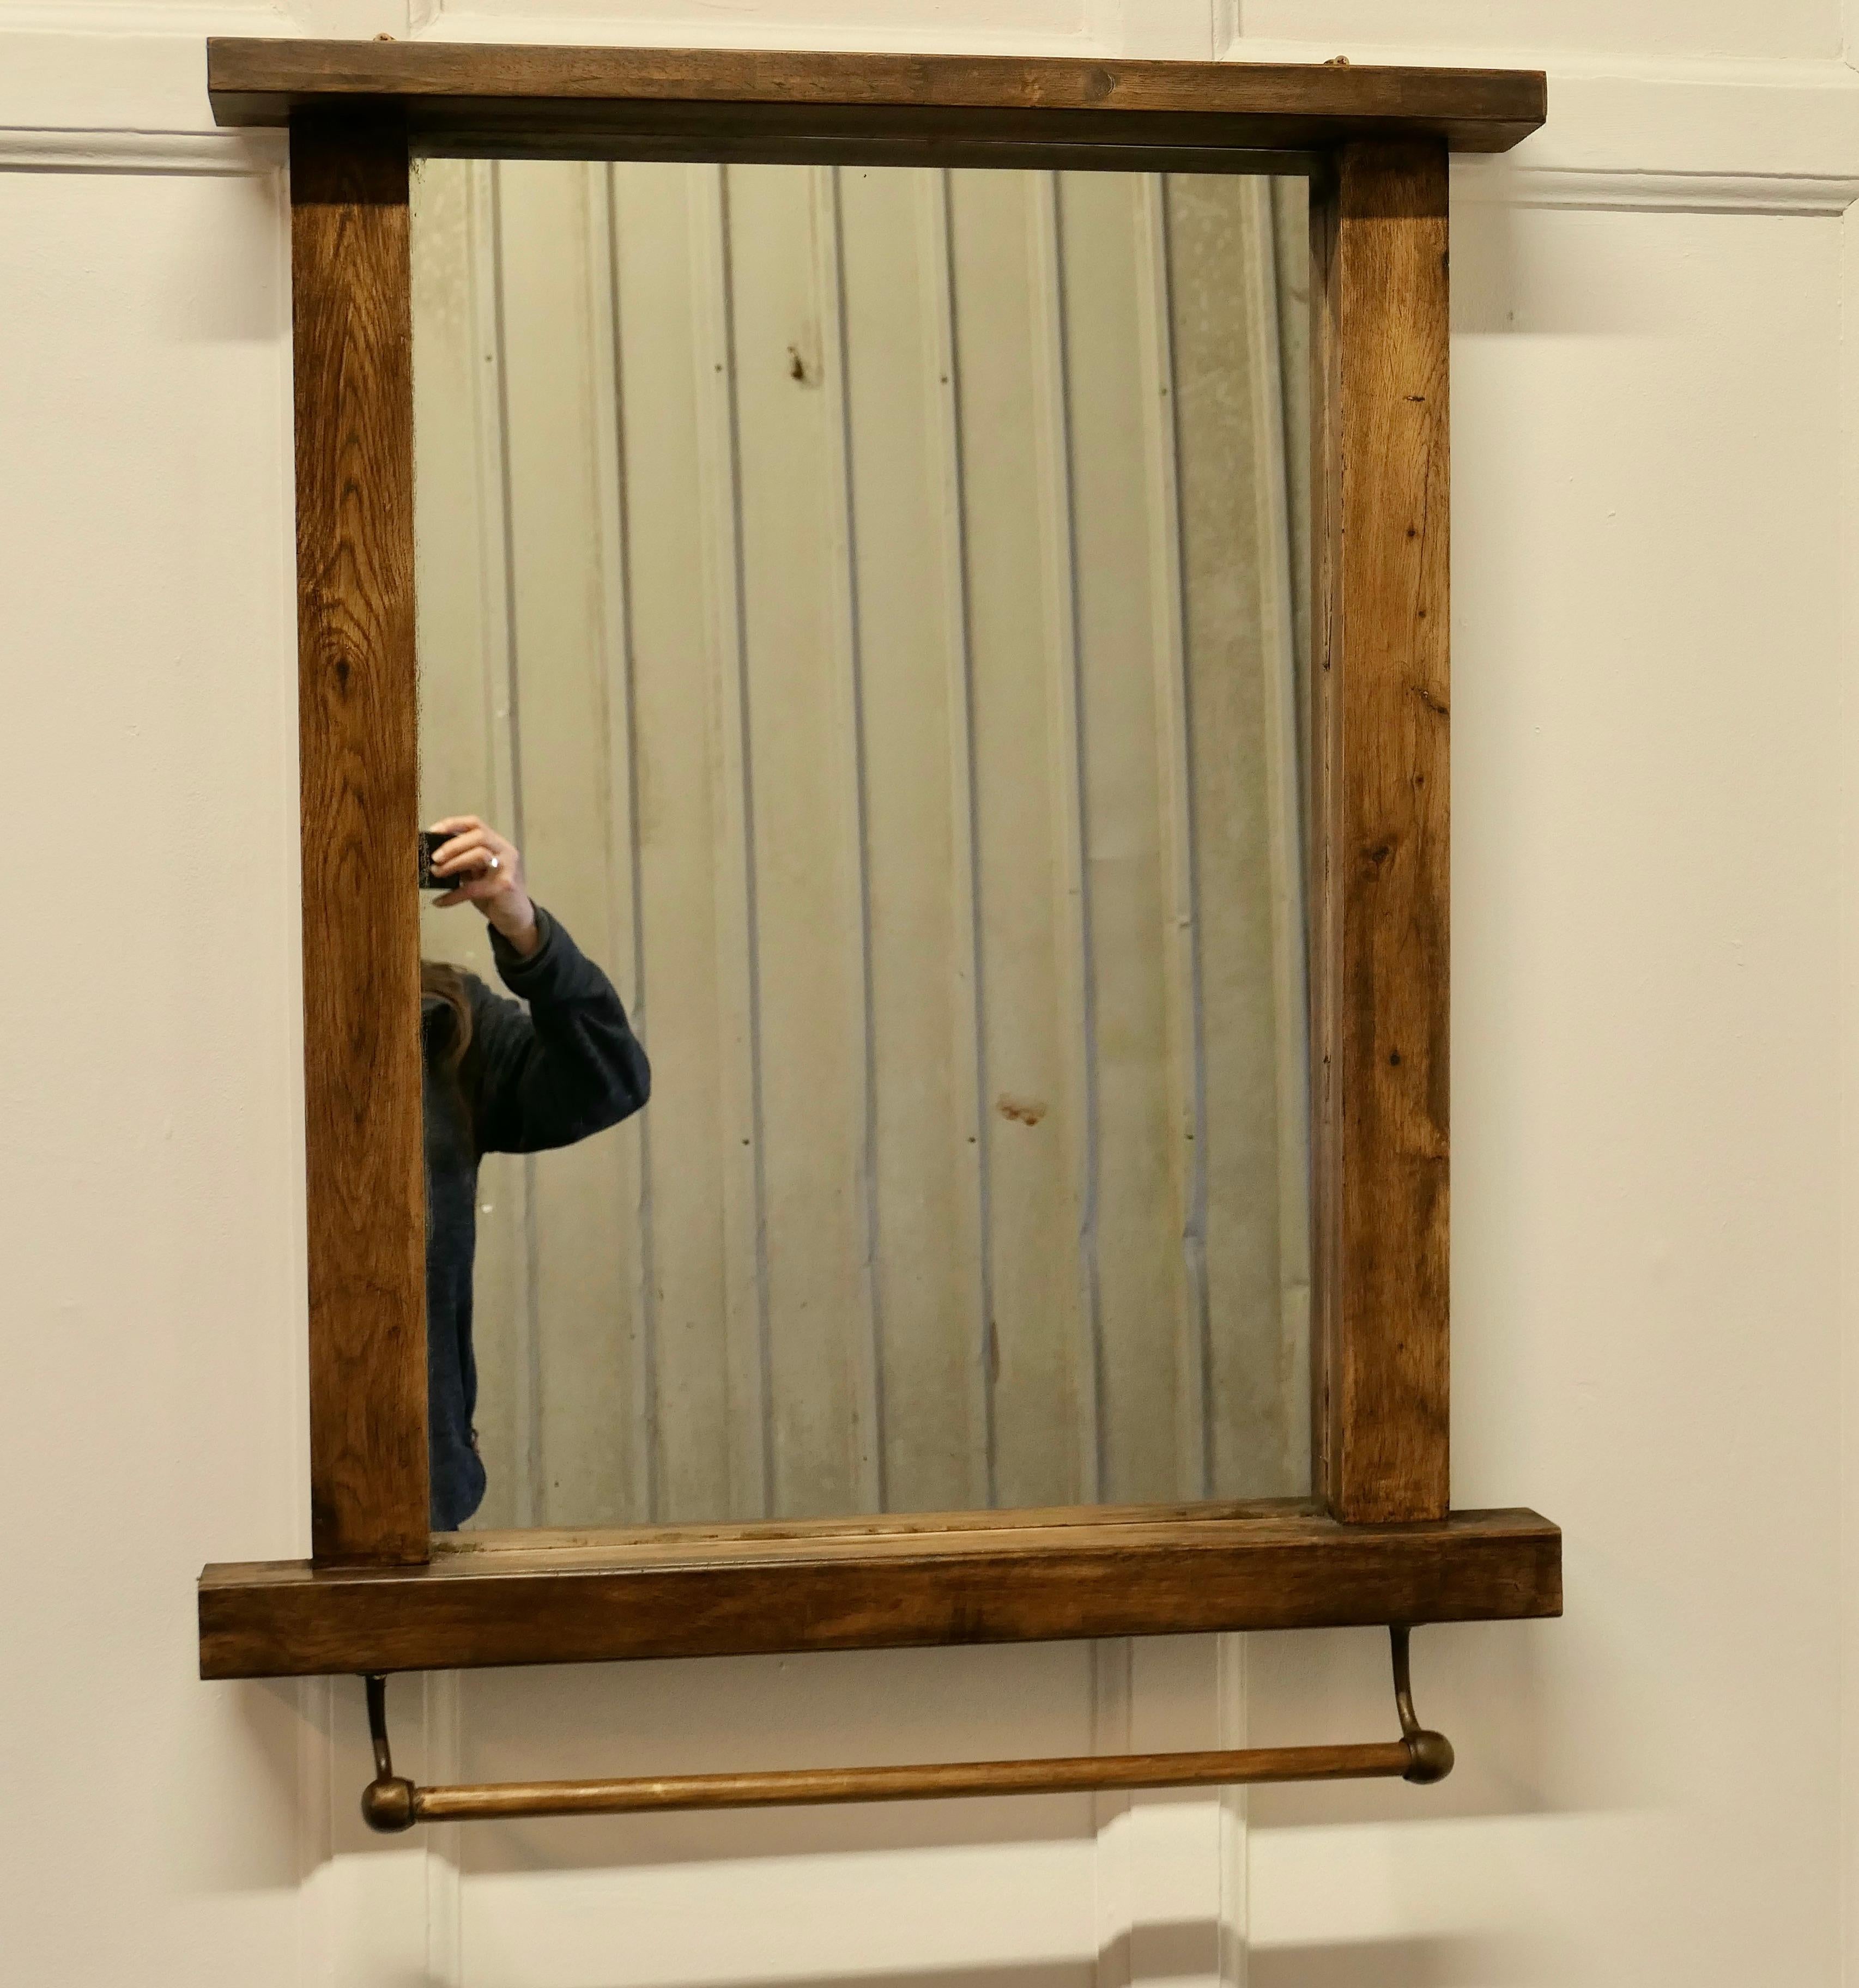 Large reclaimed oak cloakroom wall mirror with towel rail

This is a very useful piece, the large oak mirror frame has brass brackets holding a towel hanging rail at the bottom
The mirror and frame are both in good condition
The mirror is 36”